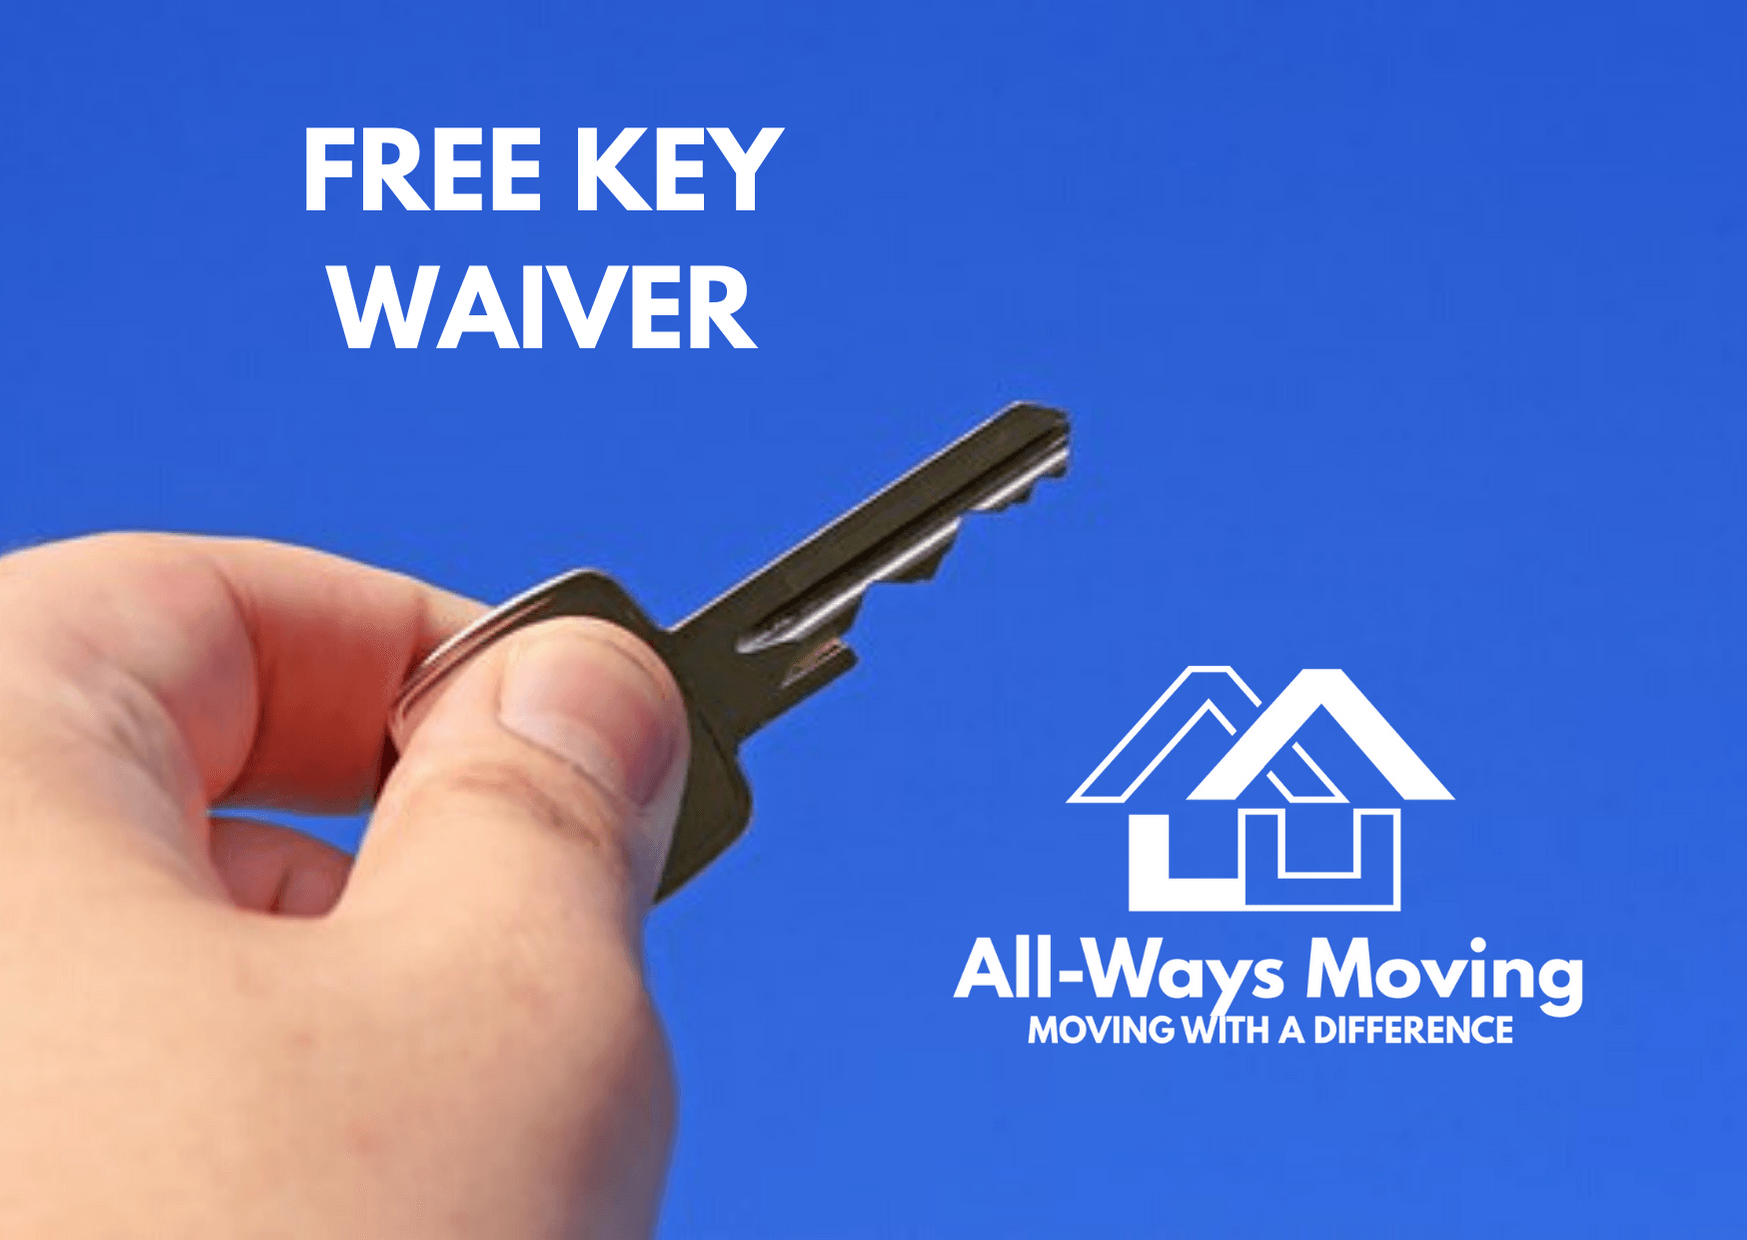 Furniture Removals company FREE late key waiver image